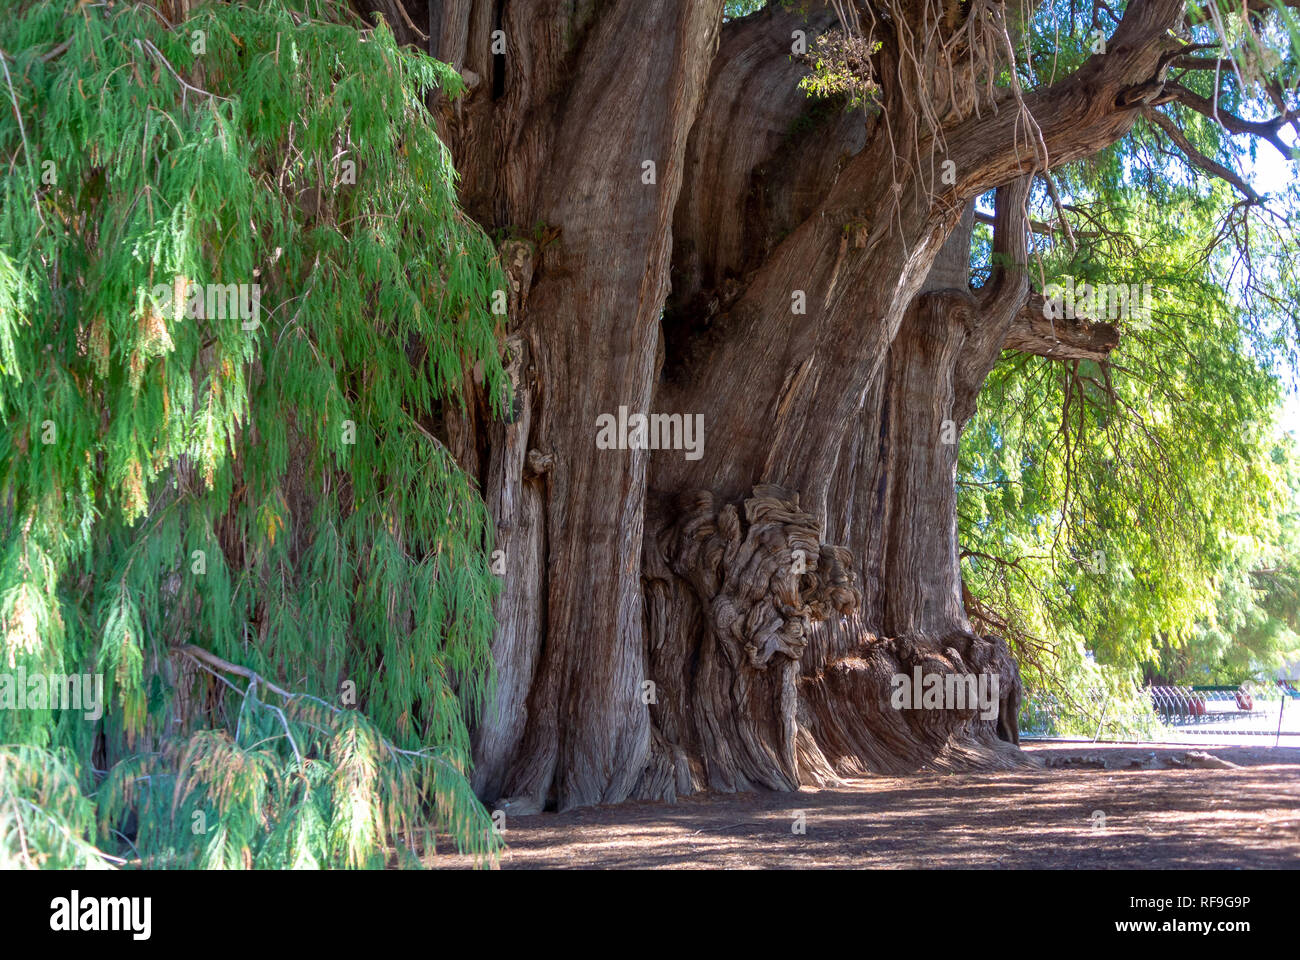 Tree of Life, the widest tree in the world, El Tule, Oaxaca, Mexico Stock Photo